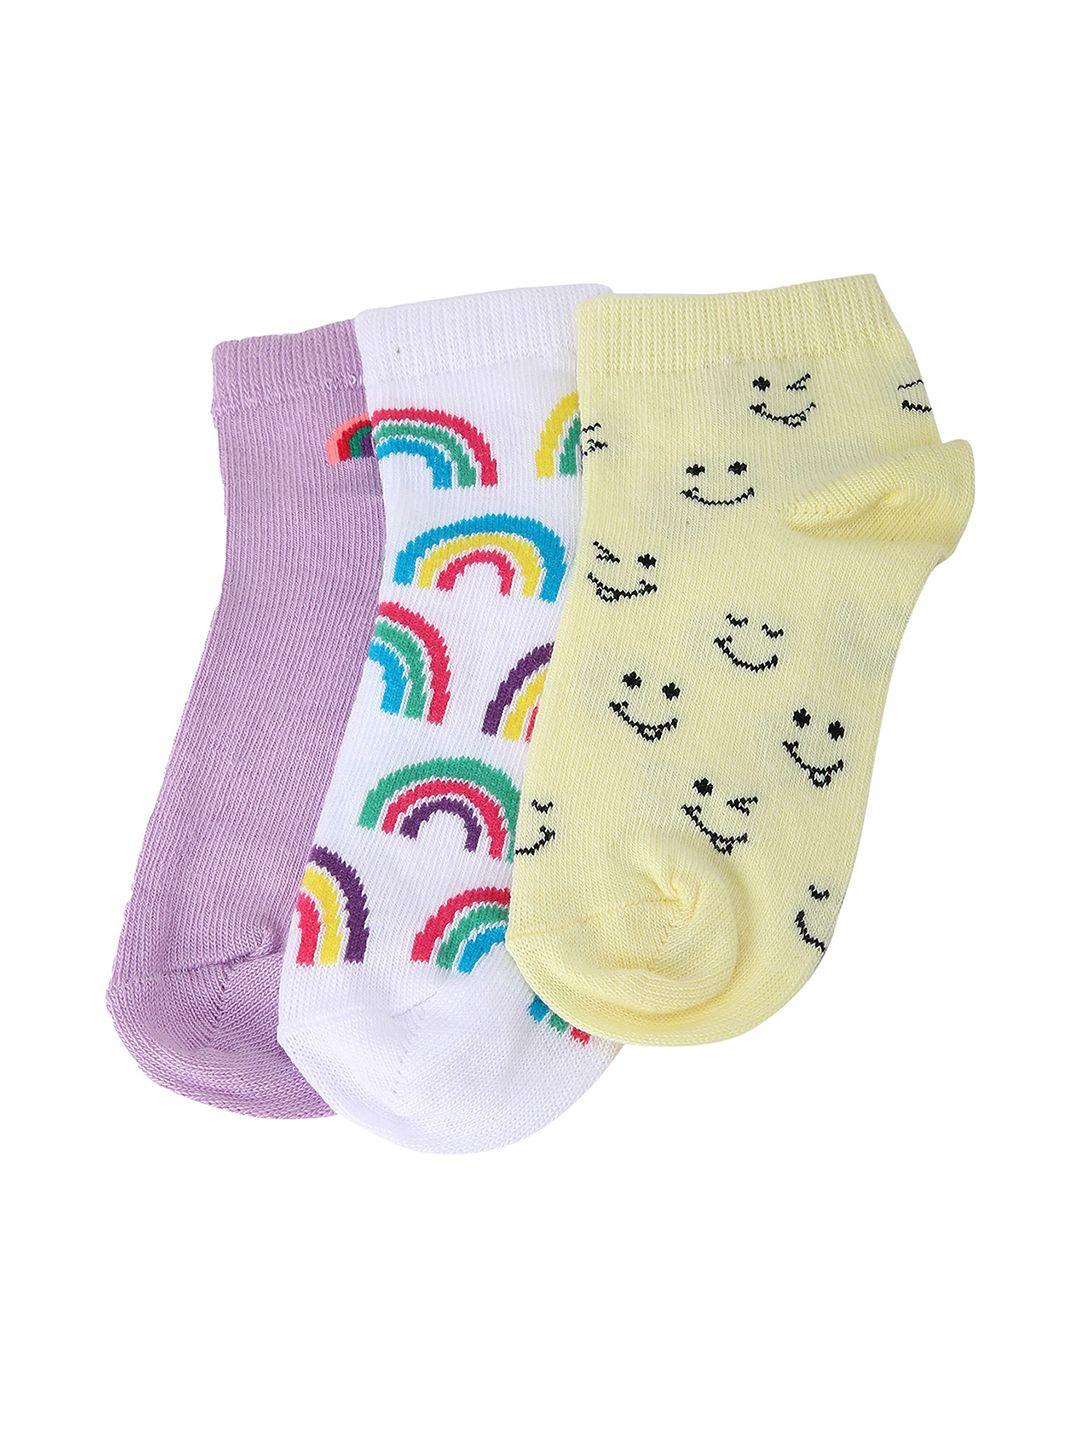 max girls pack of 3 ankle length cotton socks